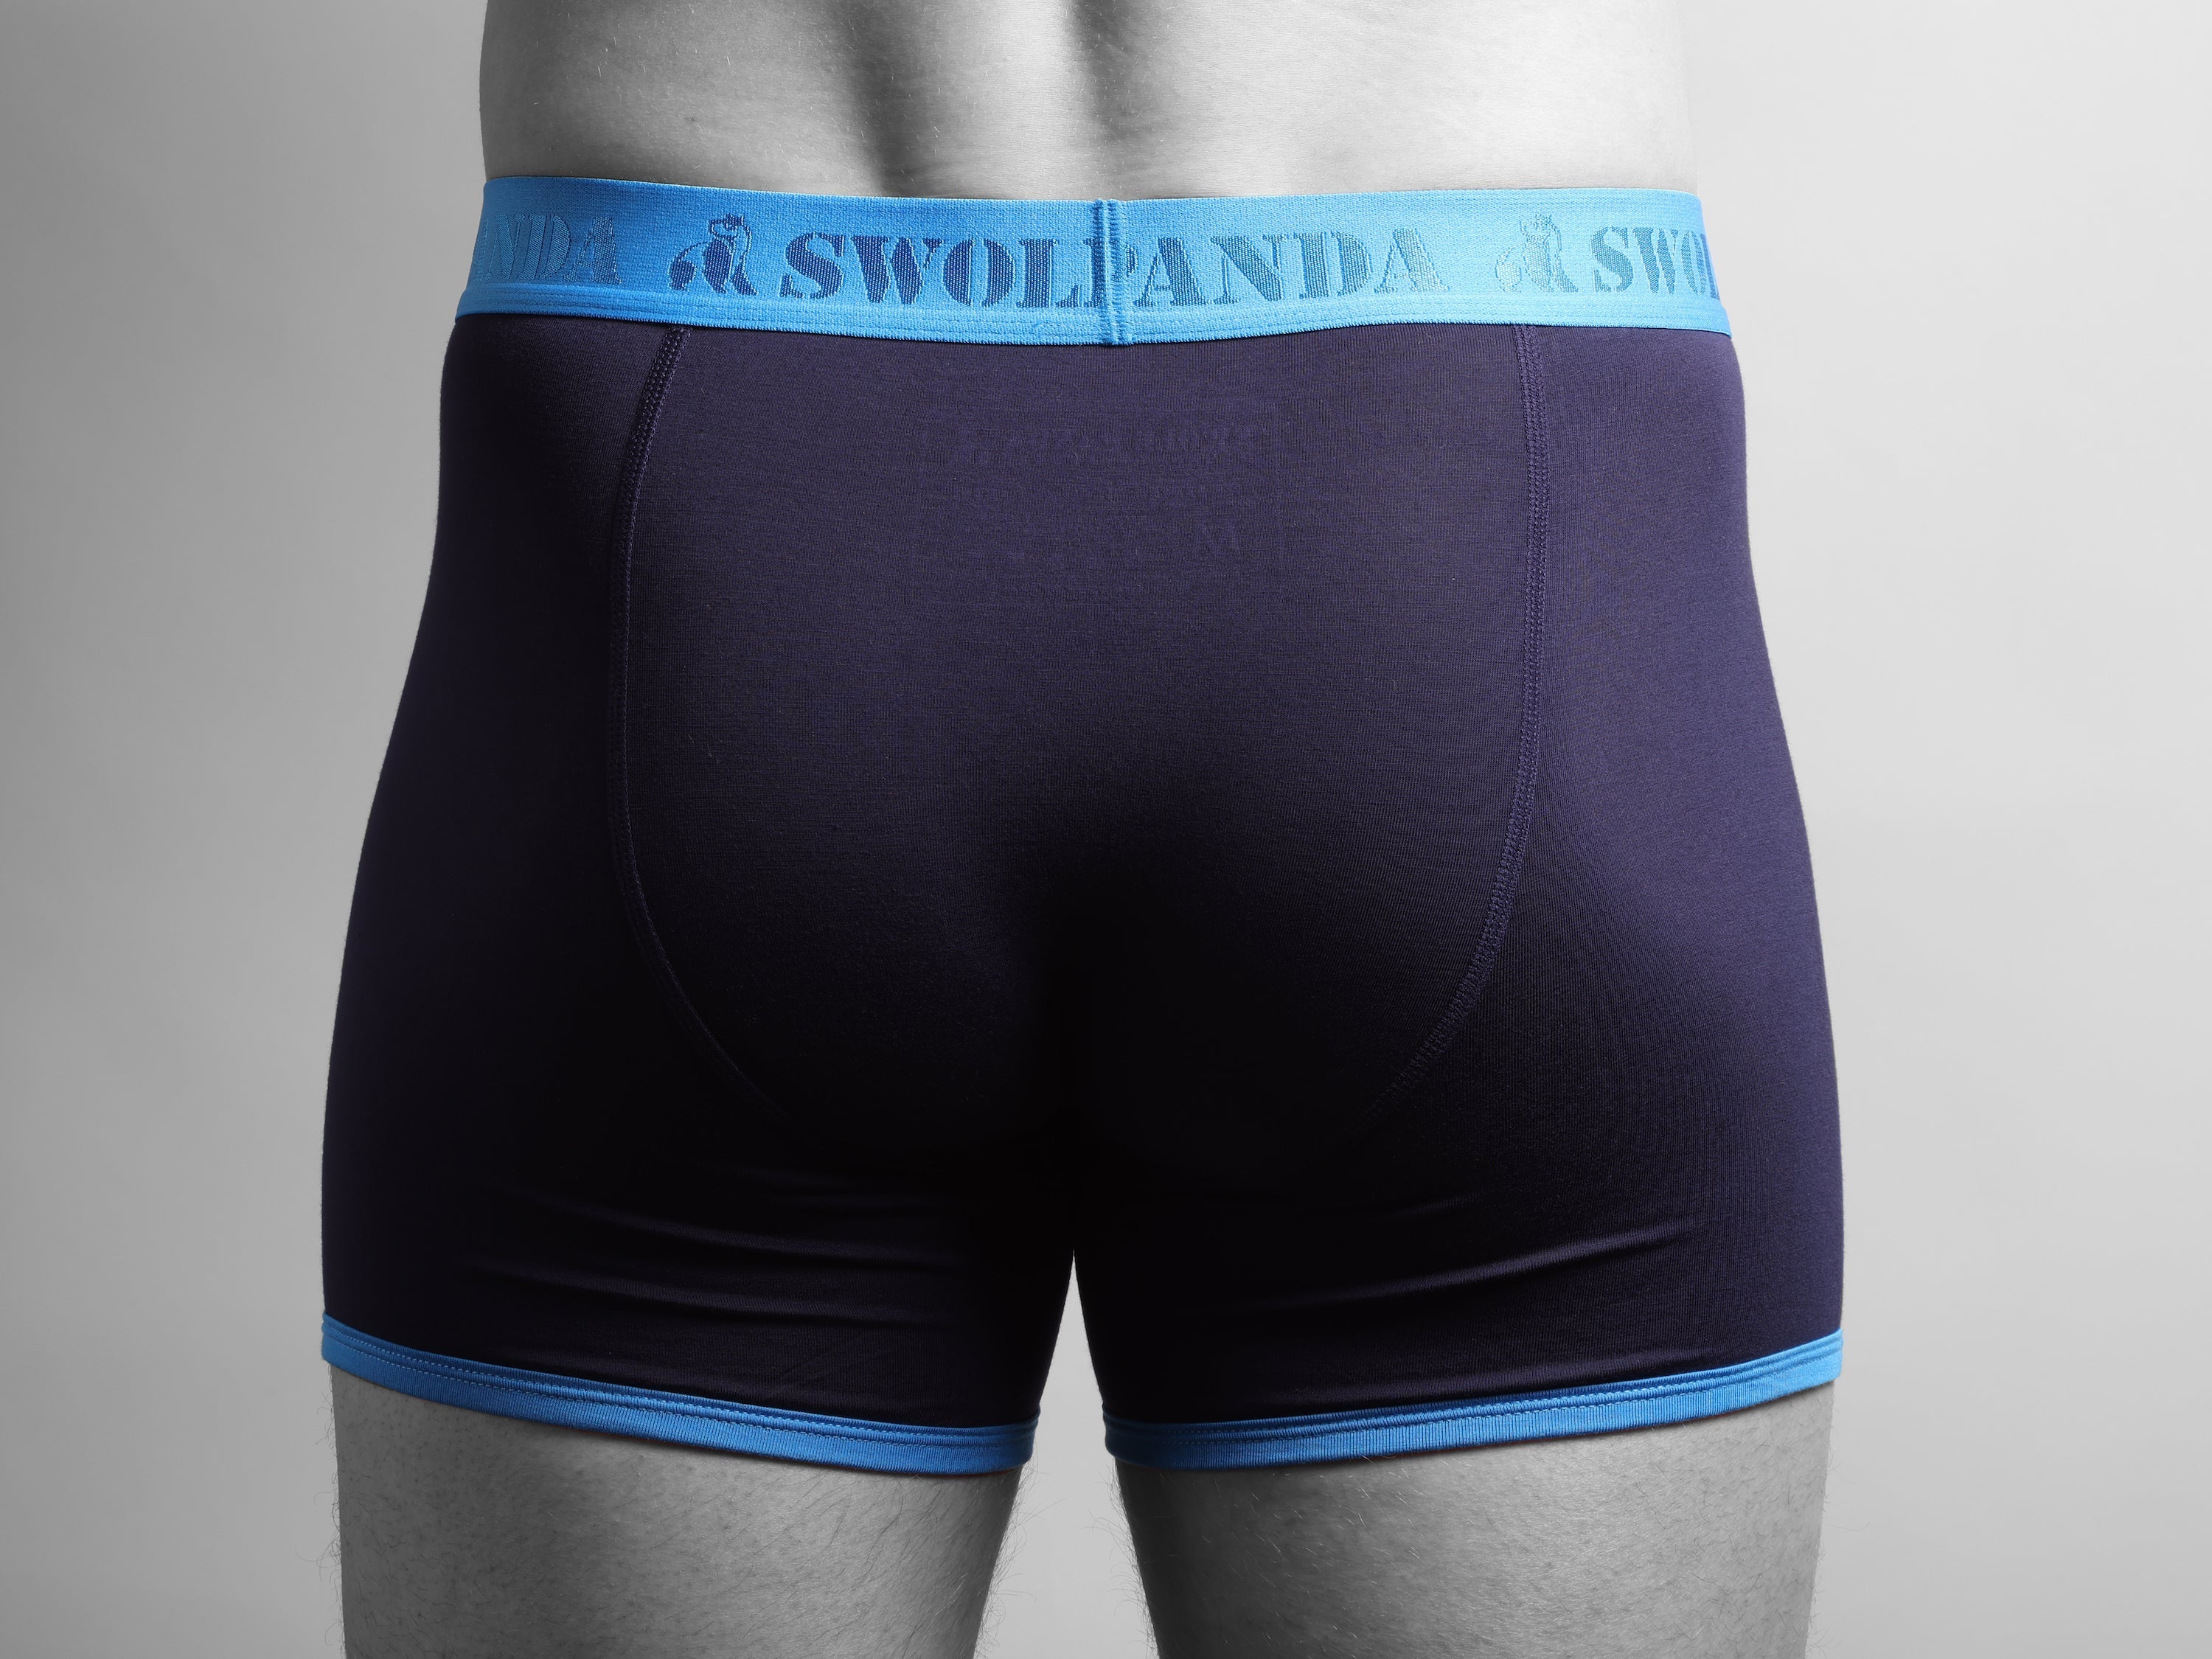 Bamboo Boxers - Navy / Blue Band